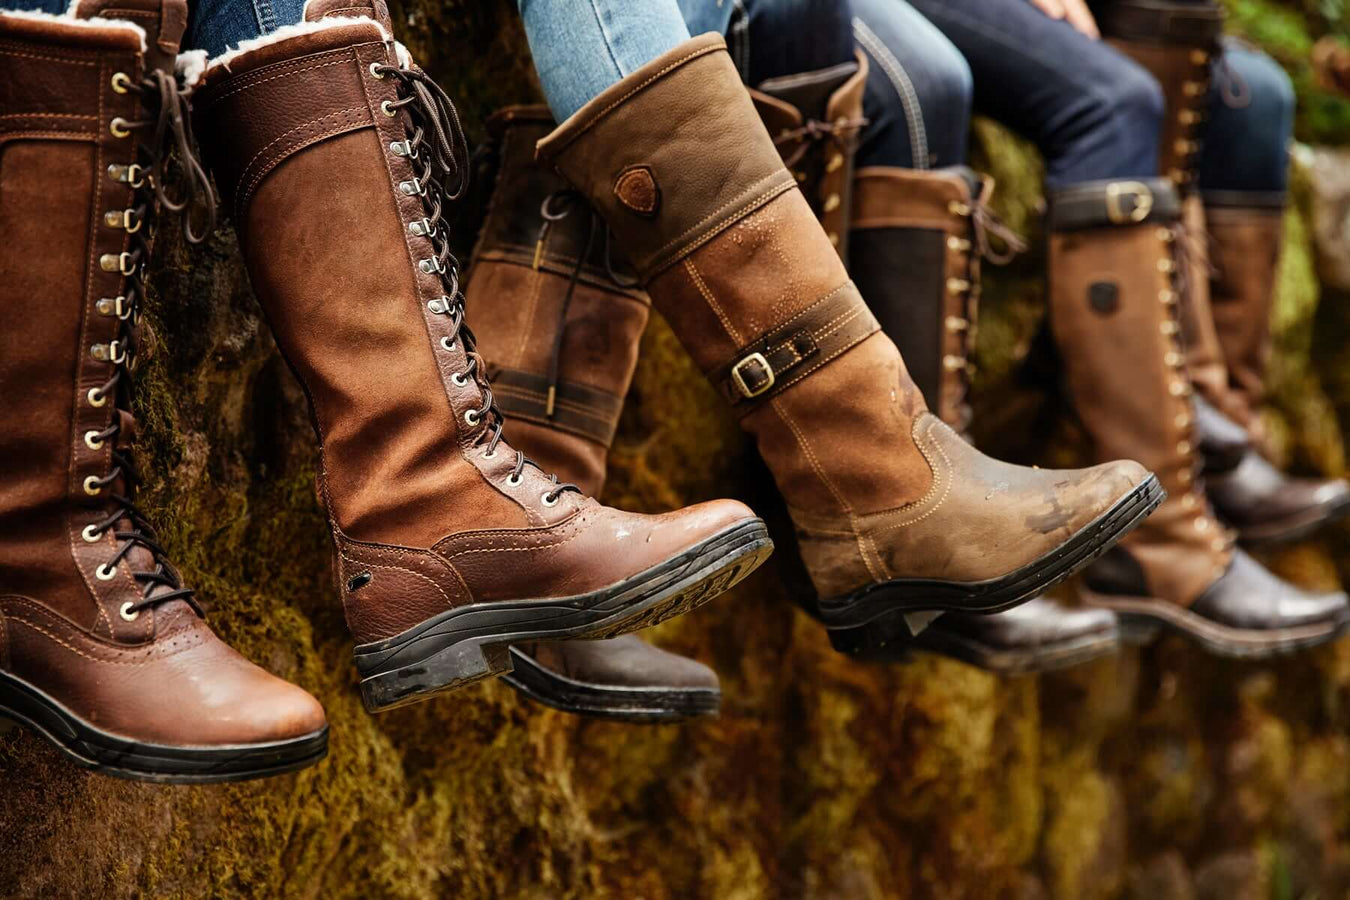 Country Boots from Ariat, Dublin River Boots, Toggi Canyon Boots and Mark Todd and Rhinegold Colorado Country Boots.  Just a few of the country boots we stock